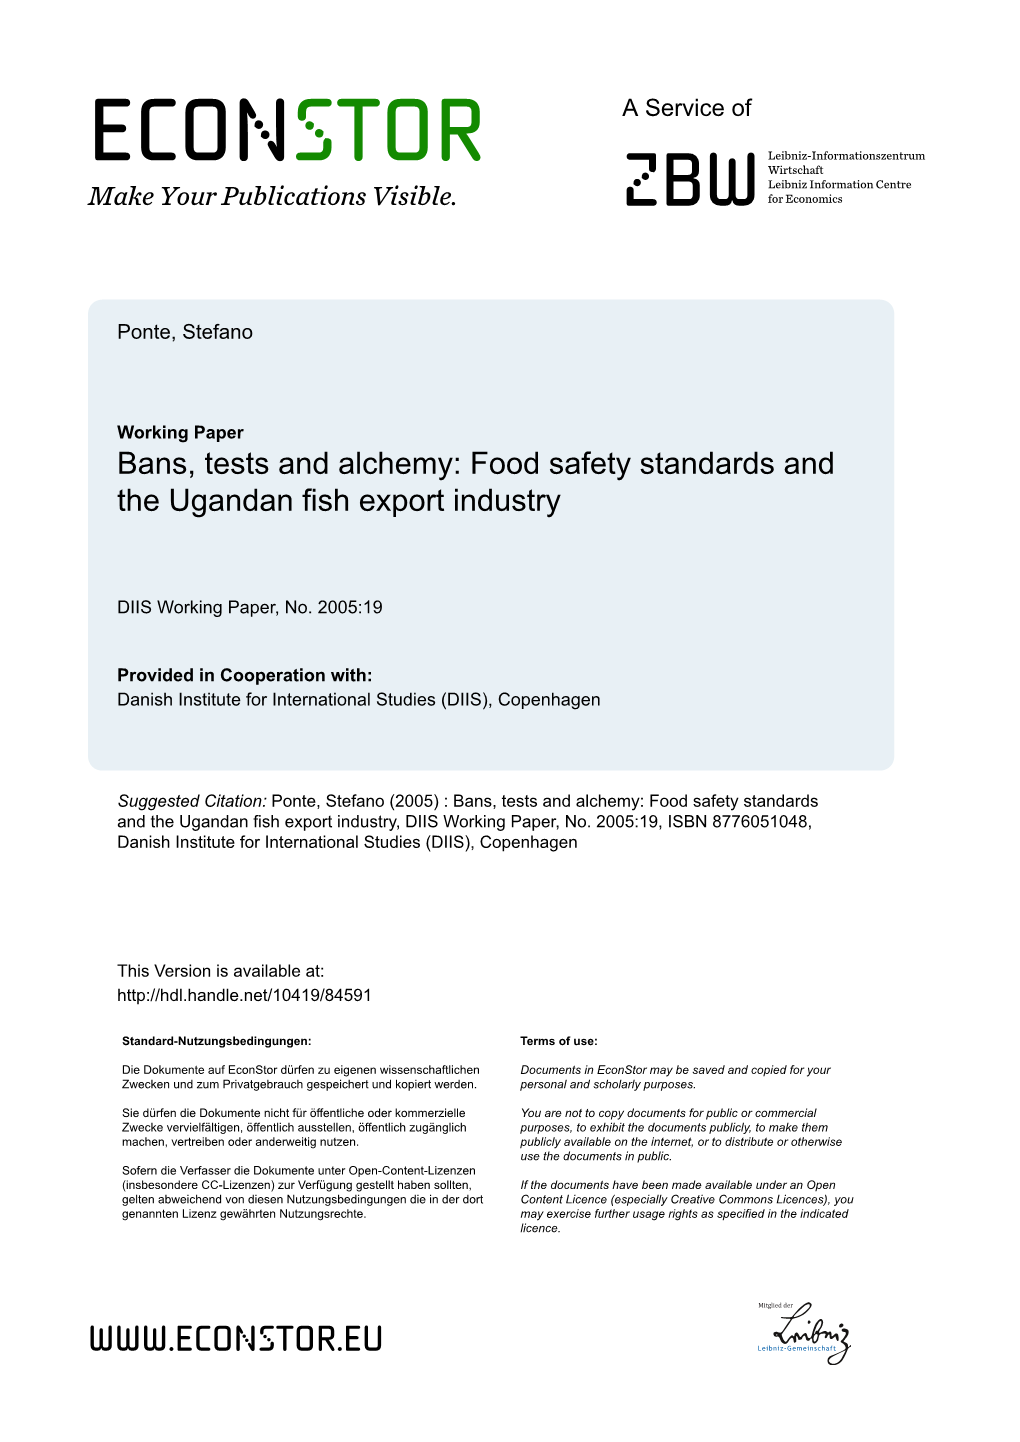 Food Safety Standards and the Ugandan Fish Export Industry